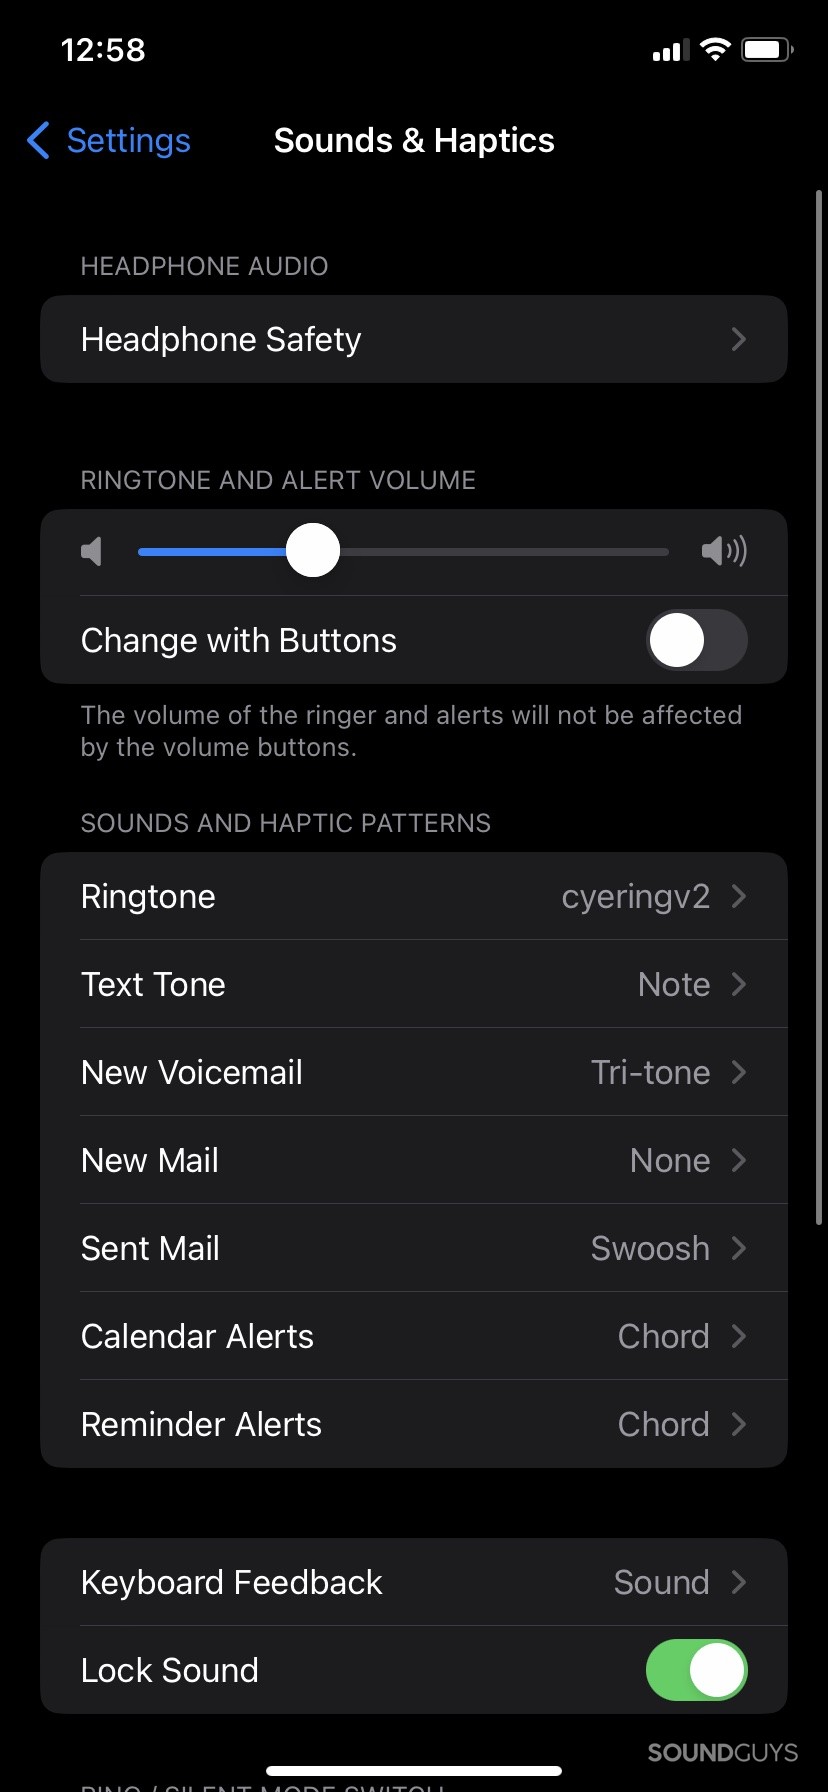 The sound settings page in the Settings app in iOS, where you can change the volume of your audio.